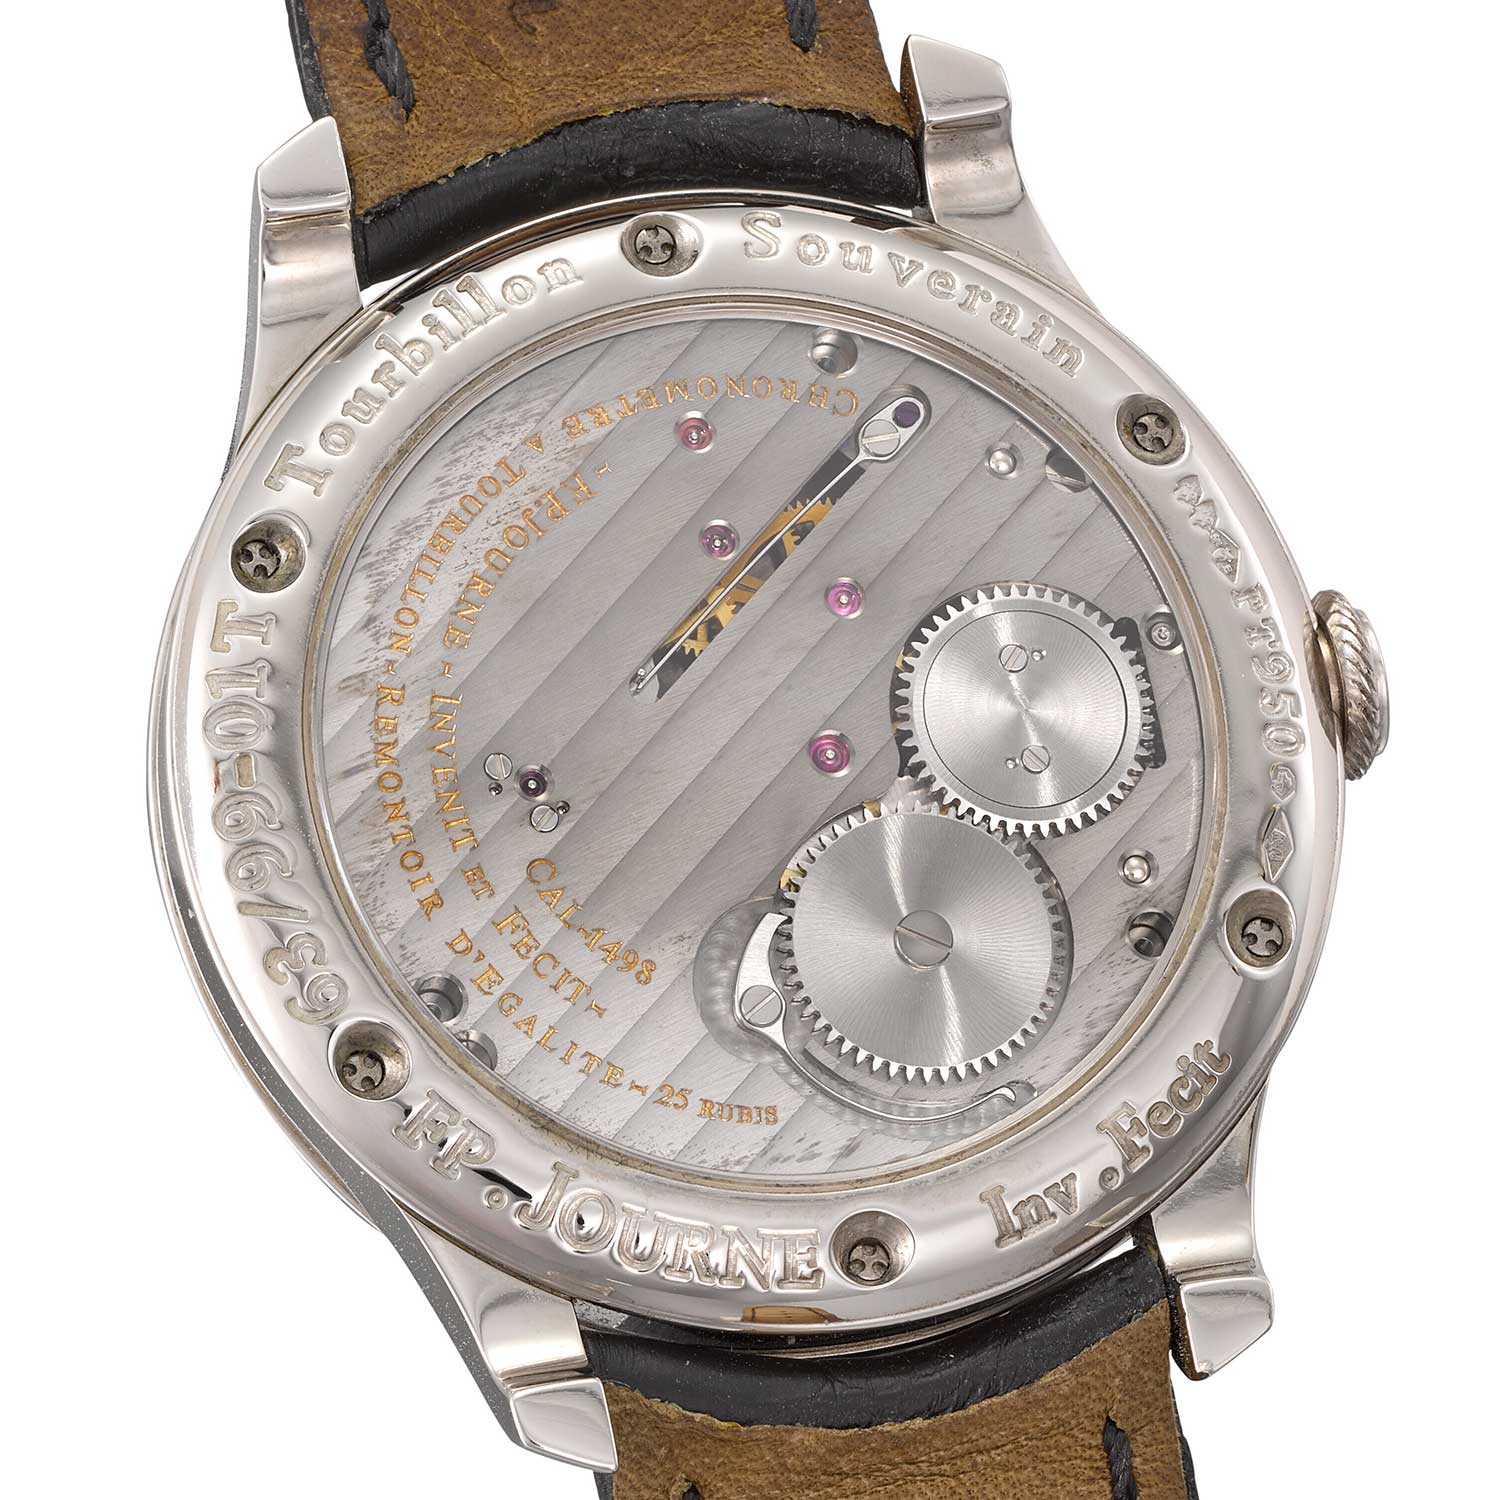 The limited-edition ruthenium model had ruthenium-coated movement plates and its own numbering format of XX/99-01T (Image: Christie’s)